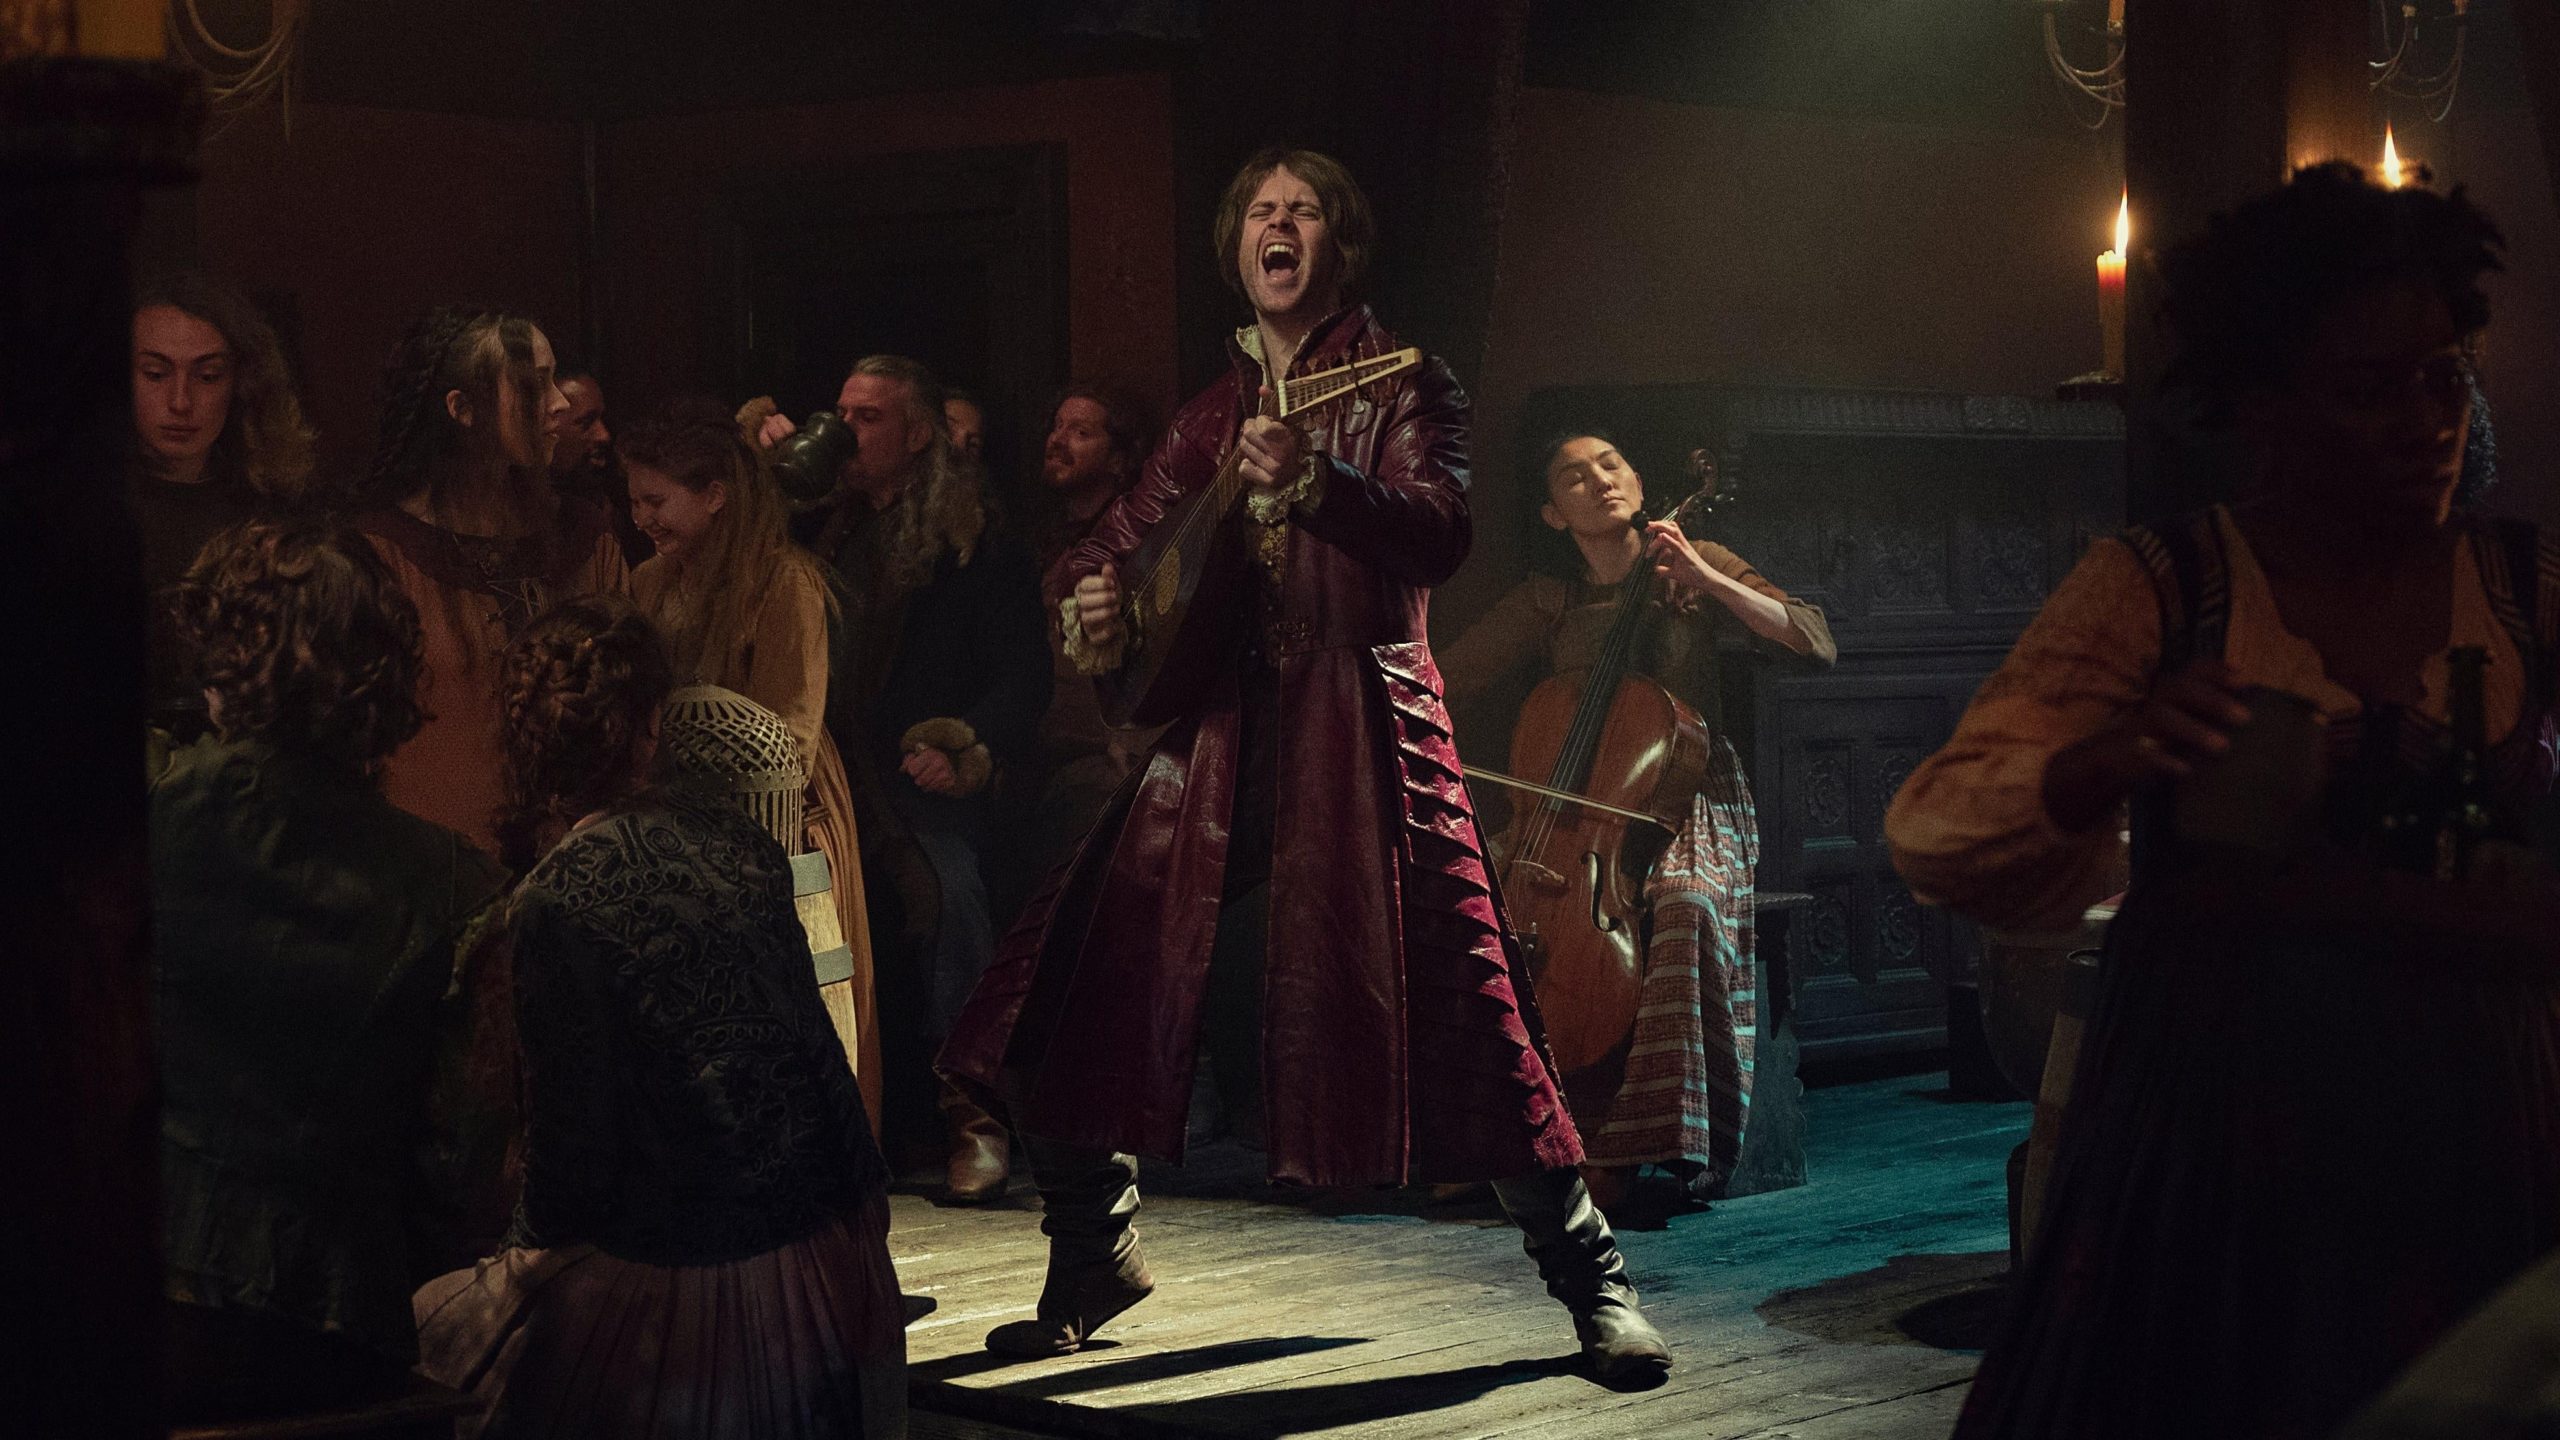 These tavern-goers may not care about his song, but we sure as hell do.  (Photo: Netflix)